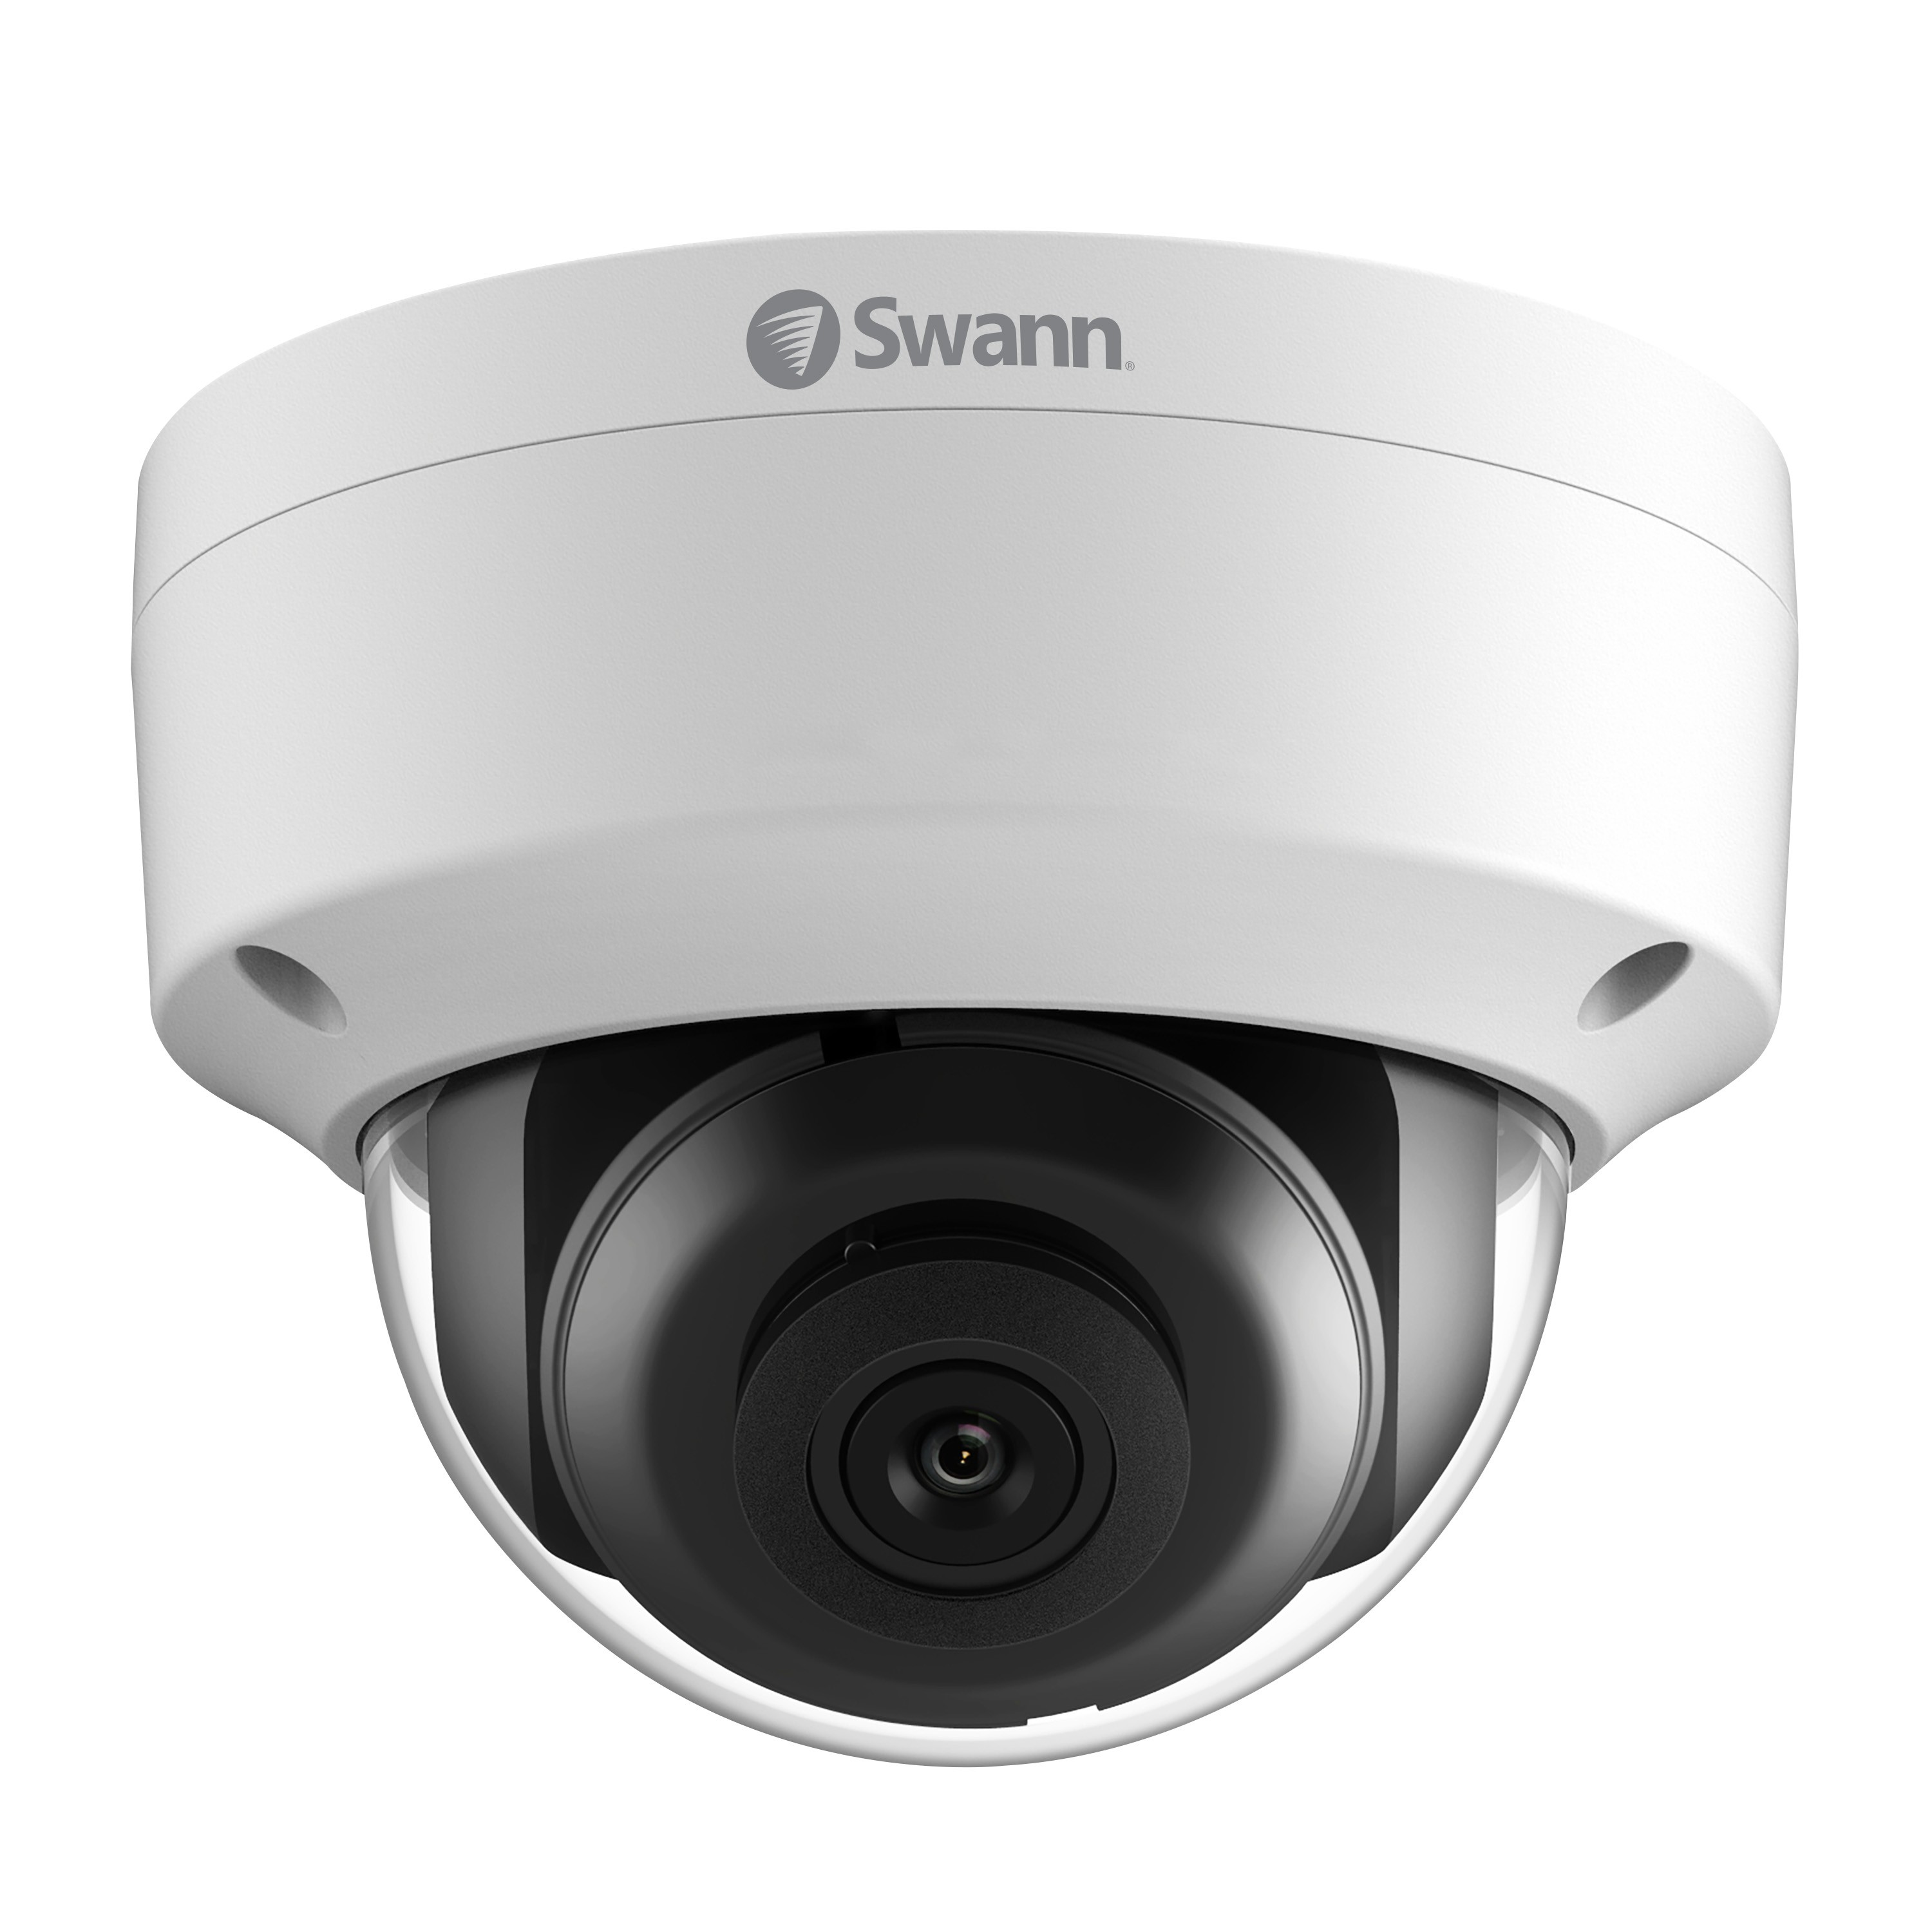 swann 5mp camera review